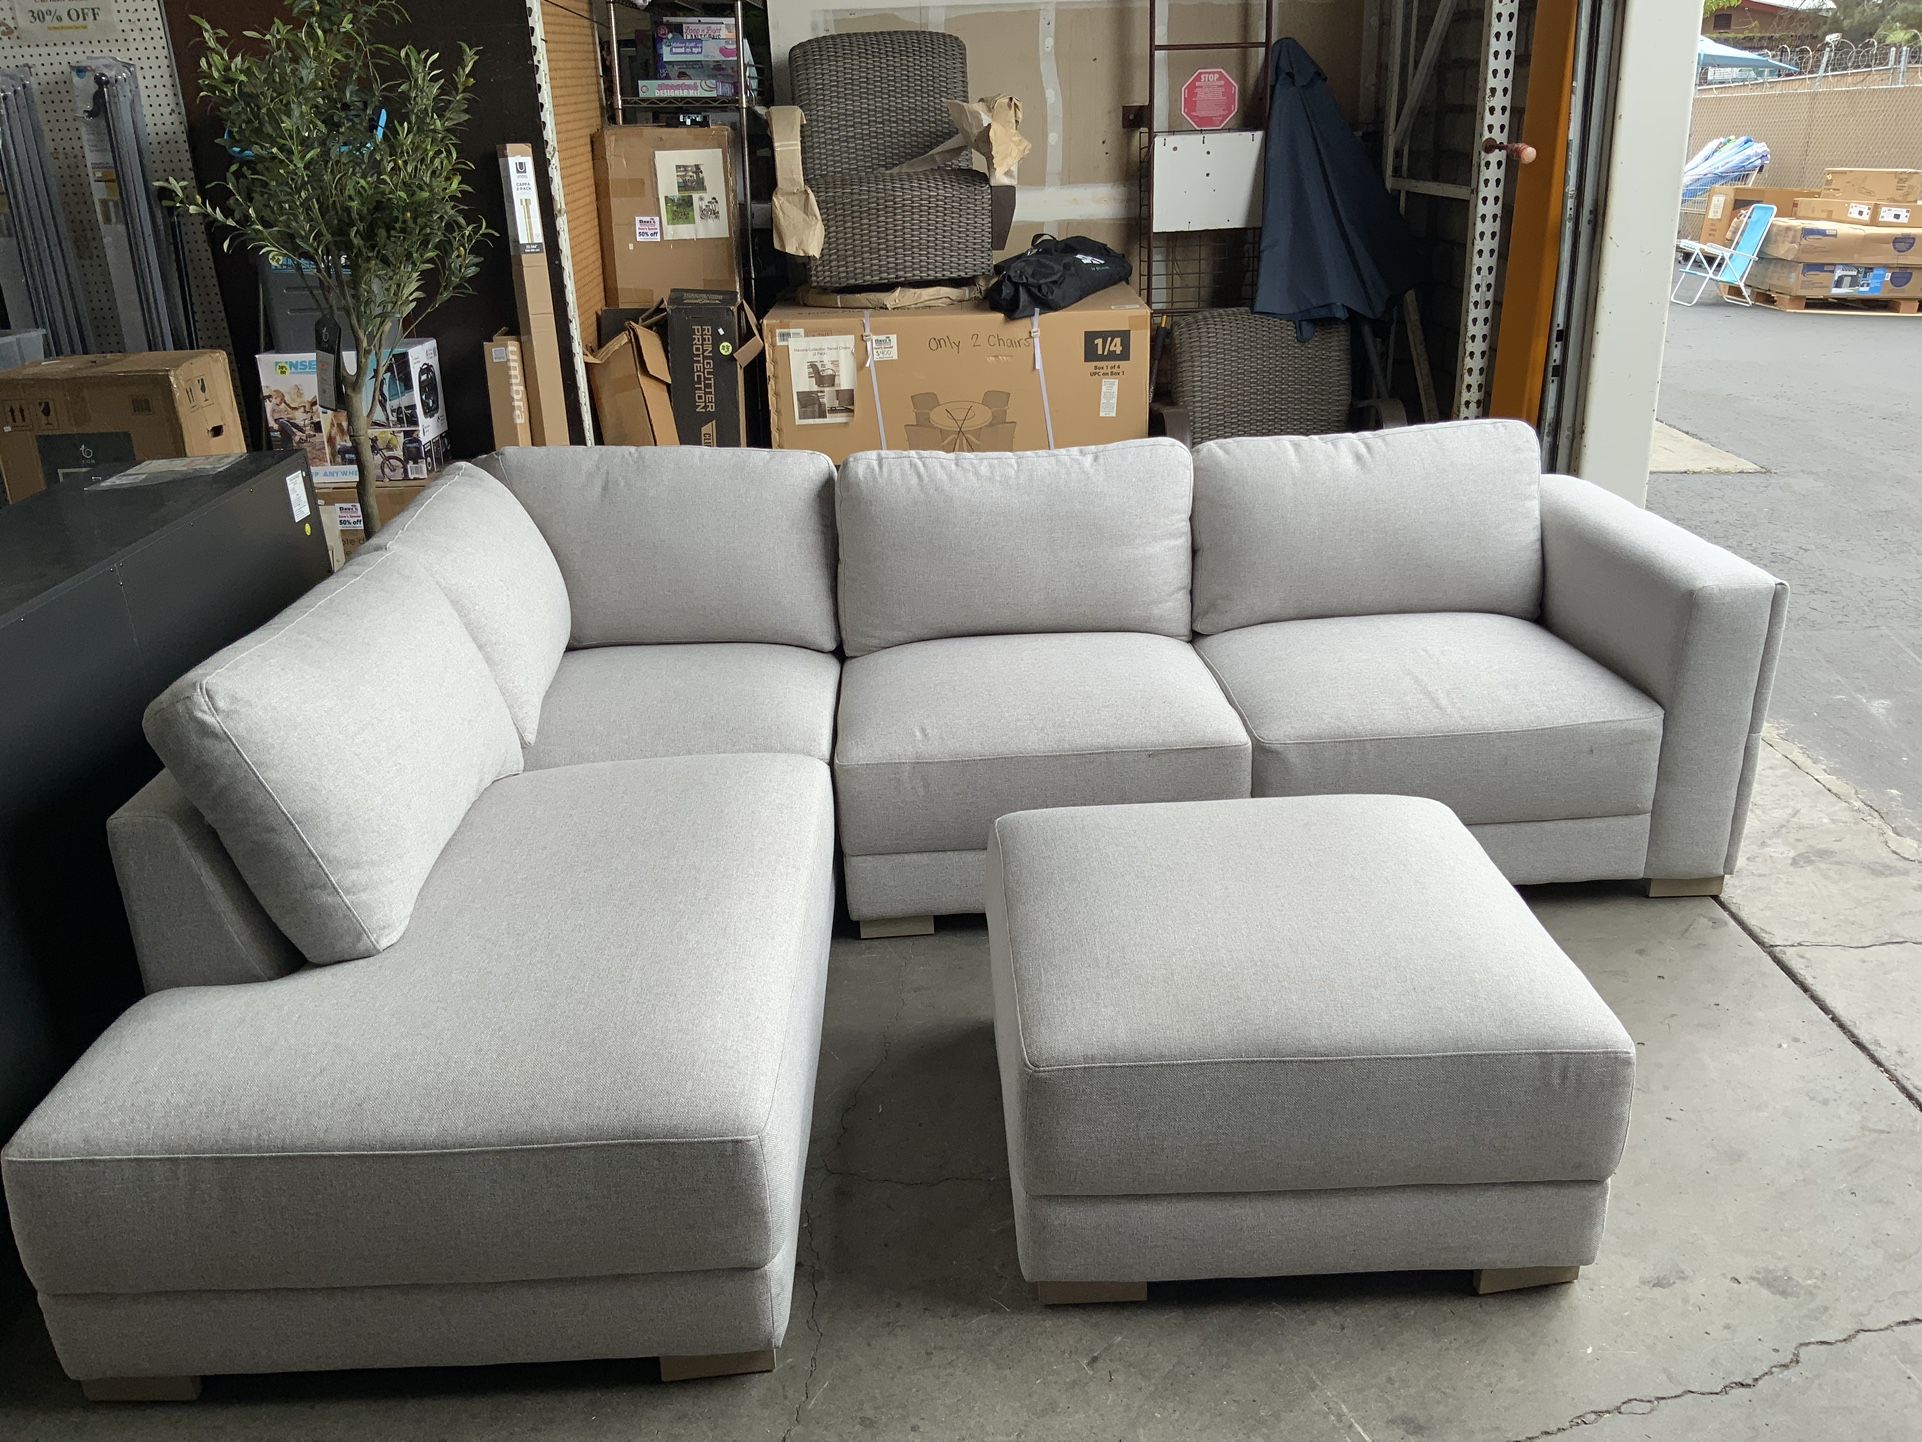 Drayden Fabric Sectional With Ottoman